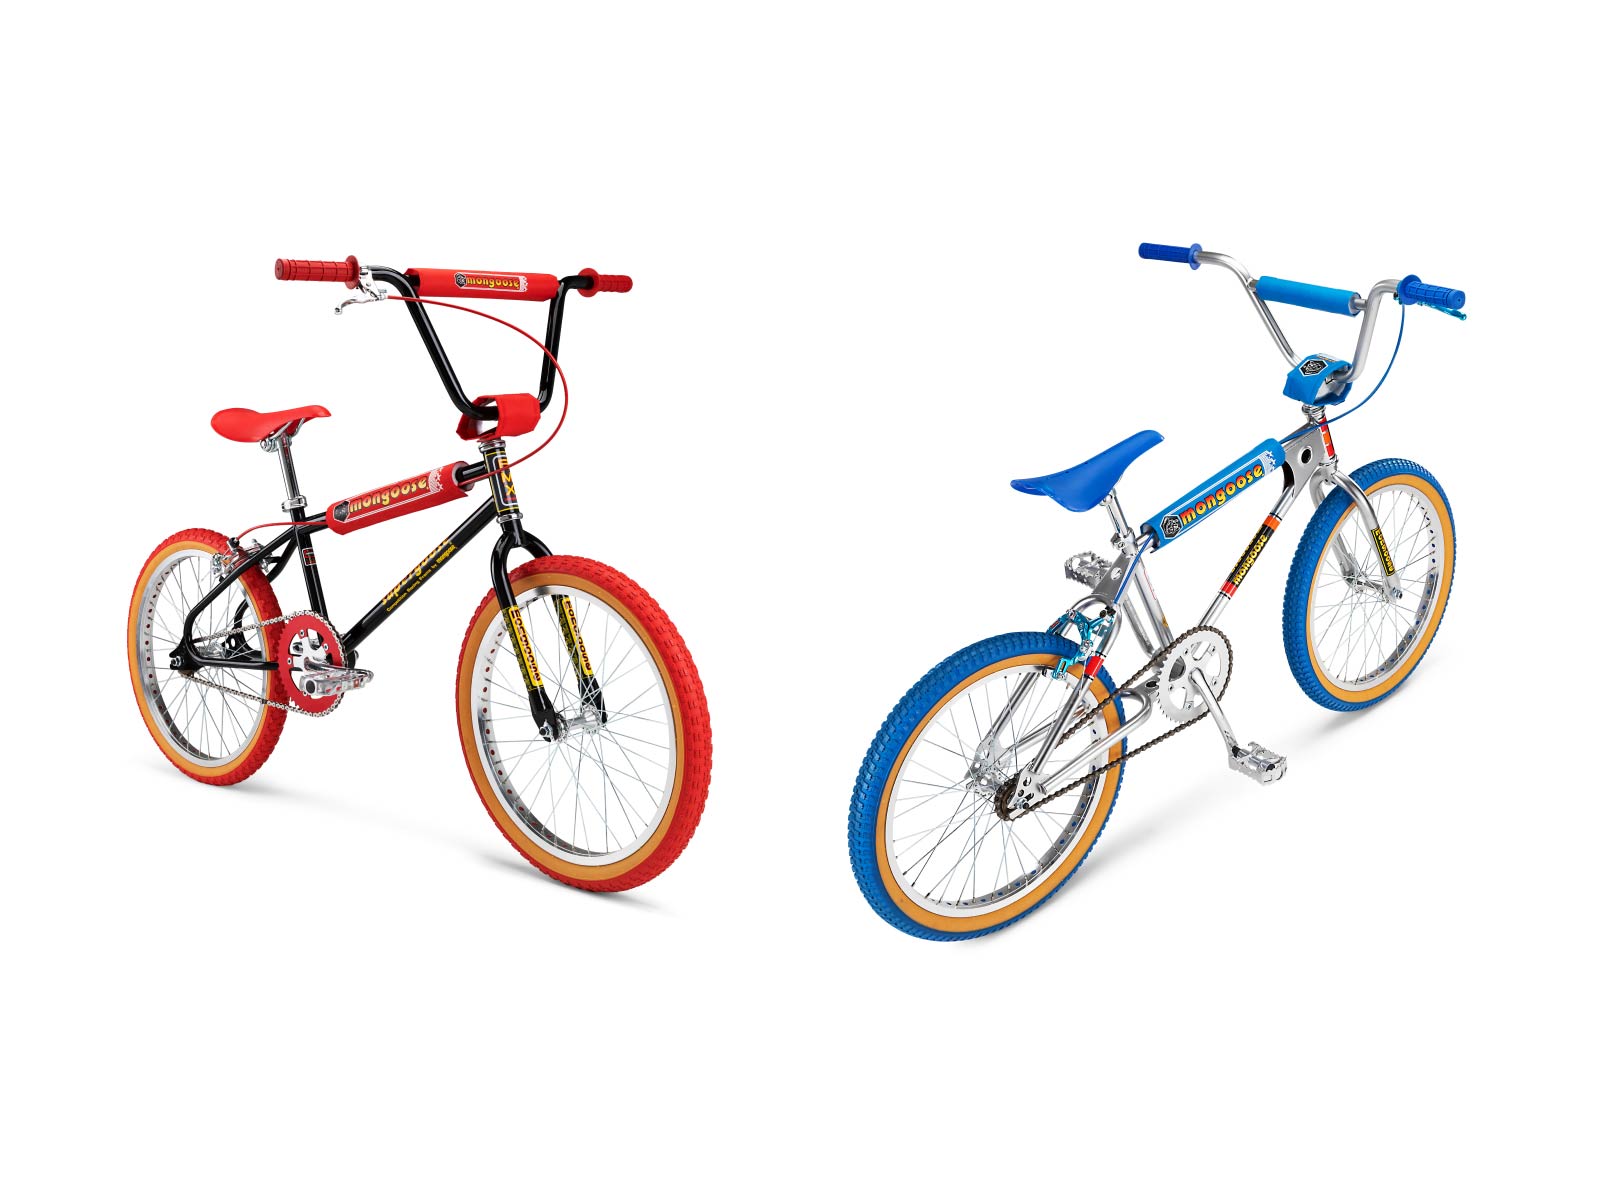 1980s Legends Return: The Mongoose California Special And Supergoose BMX  Bikes Are Back